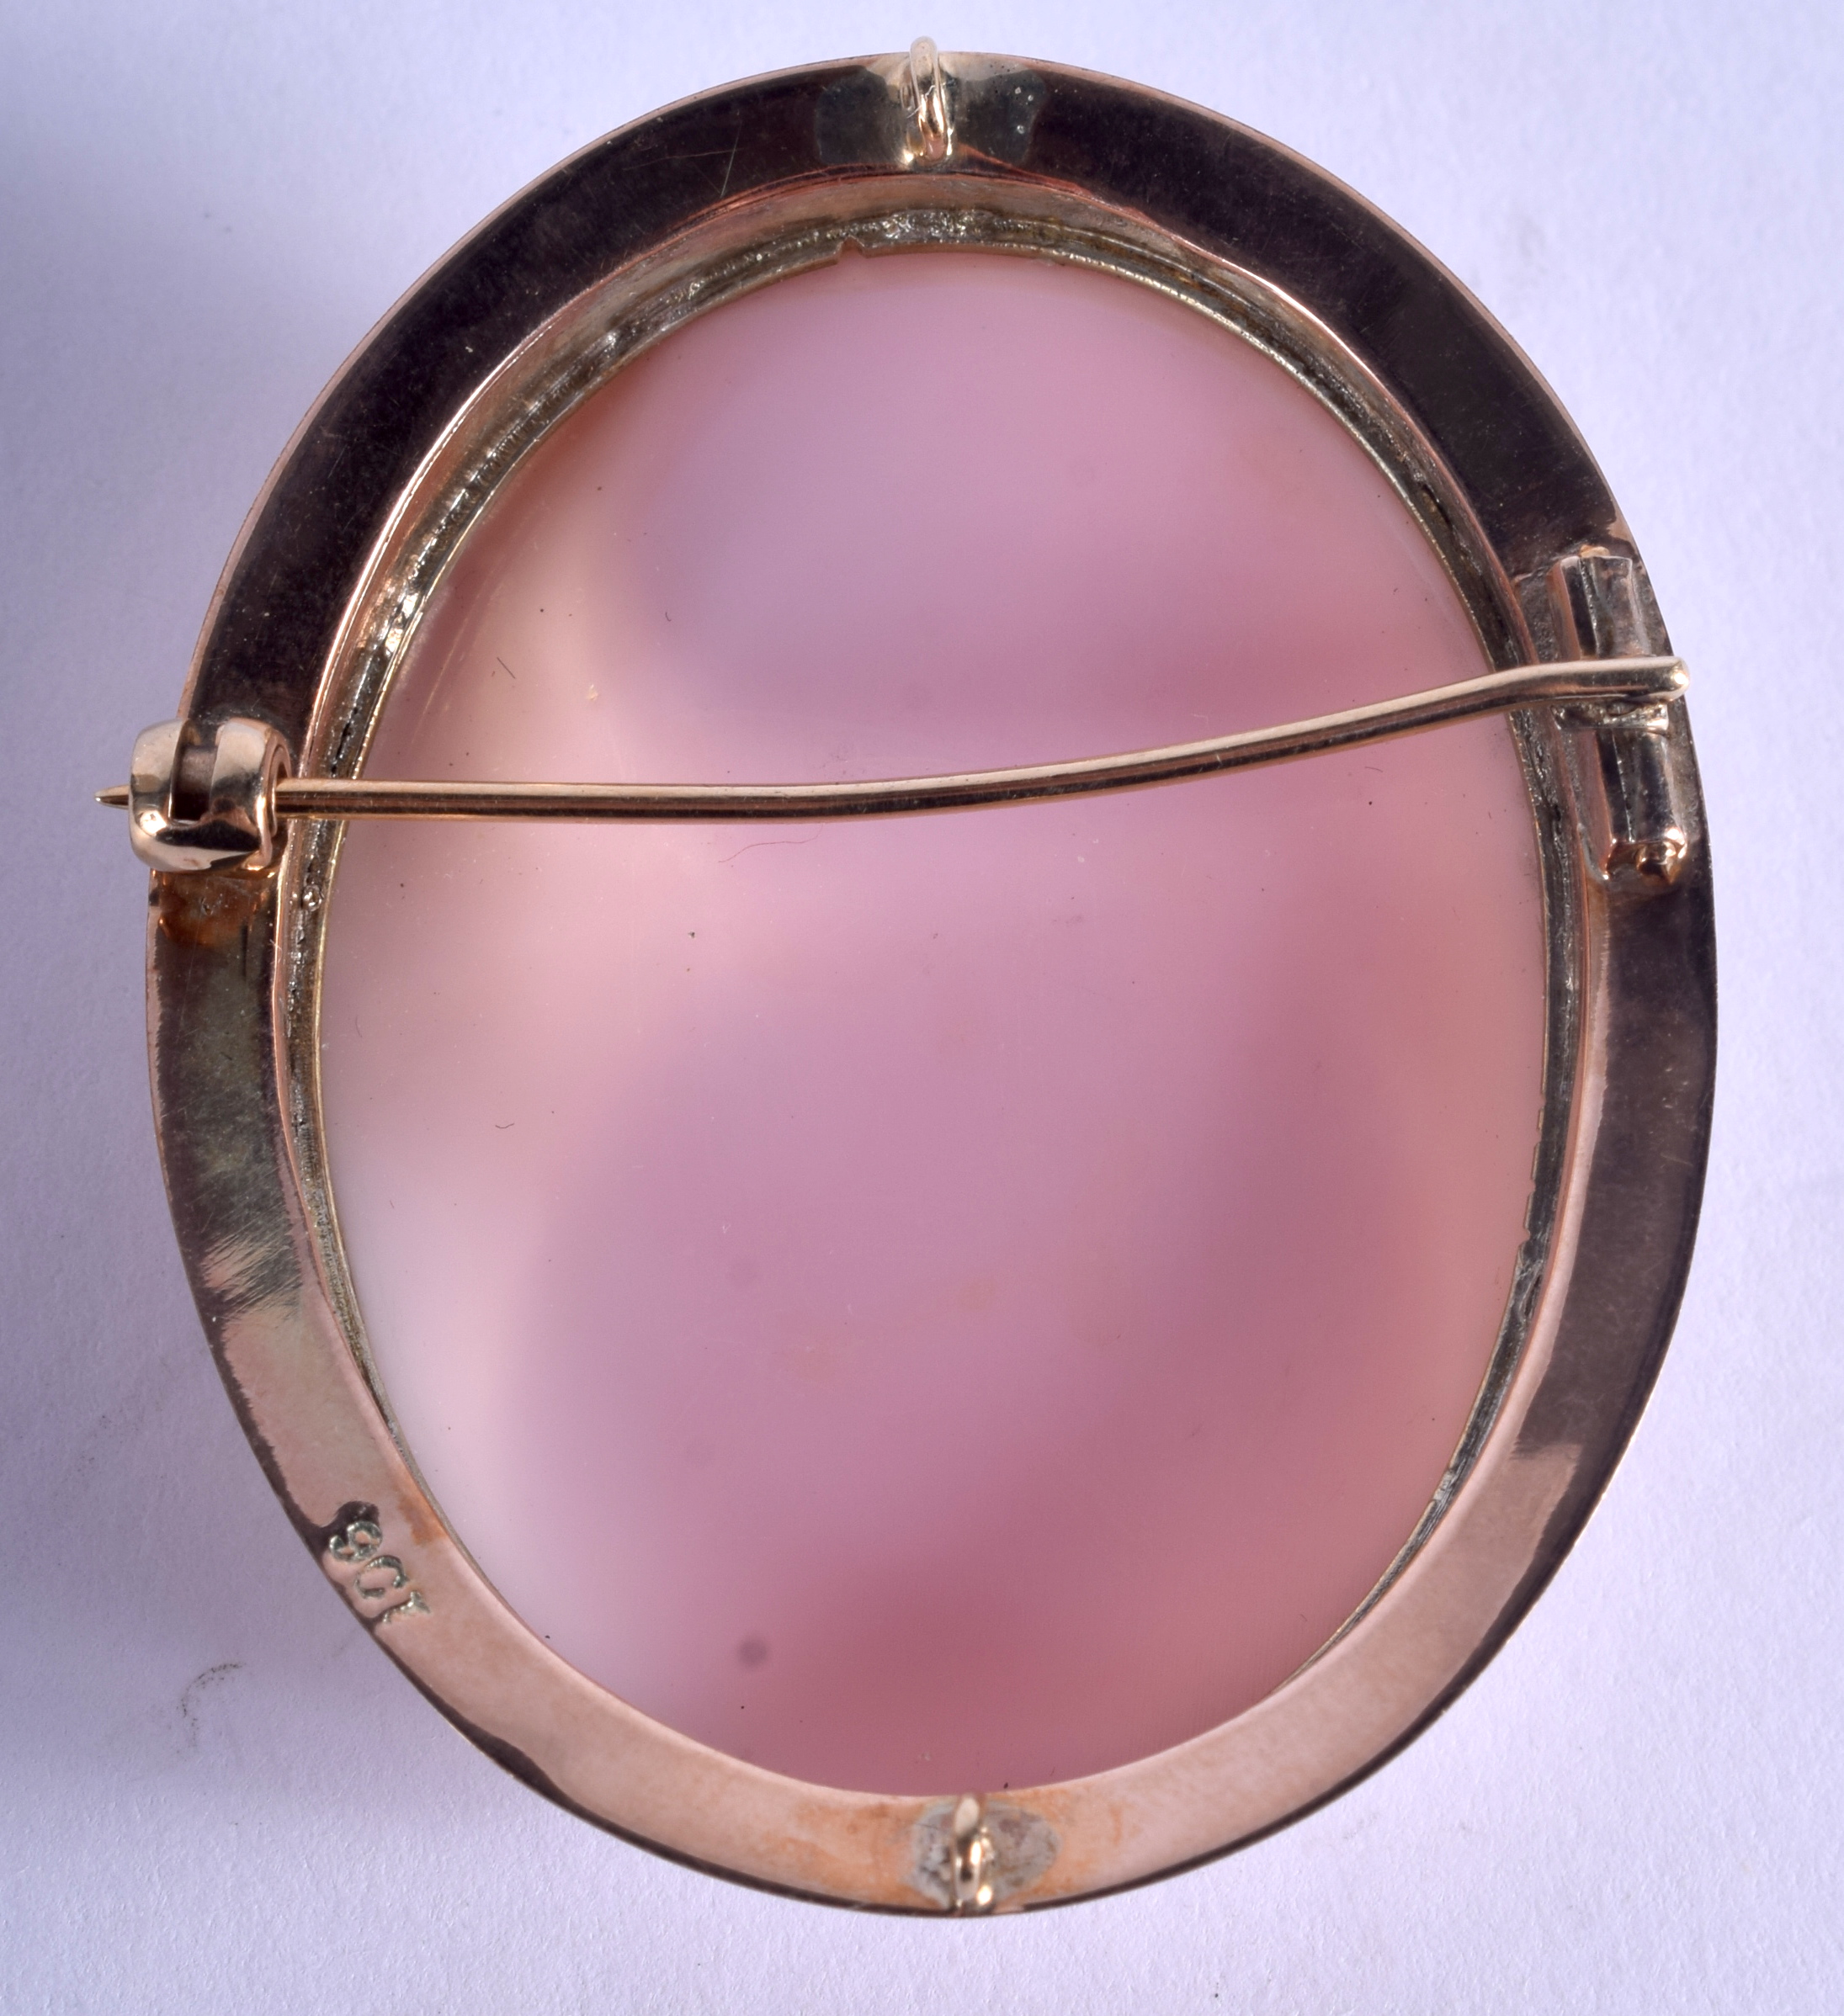 AN ANTIQUE 9CT GOLD CAMEO BROOCH. 16.7 grams. 4 cm x 4.5 cm. - Image 2 of 3